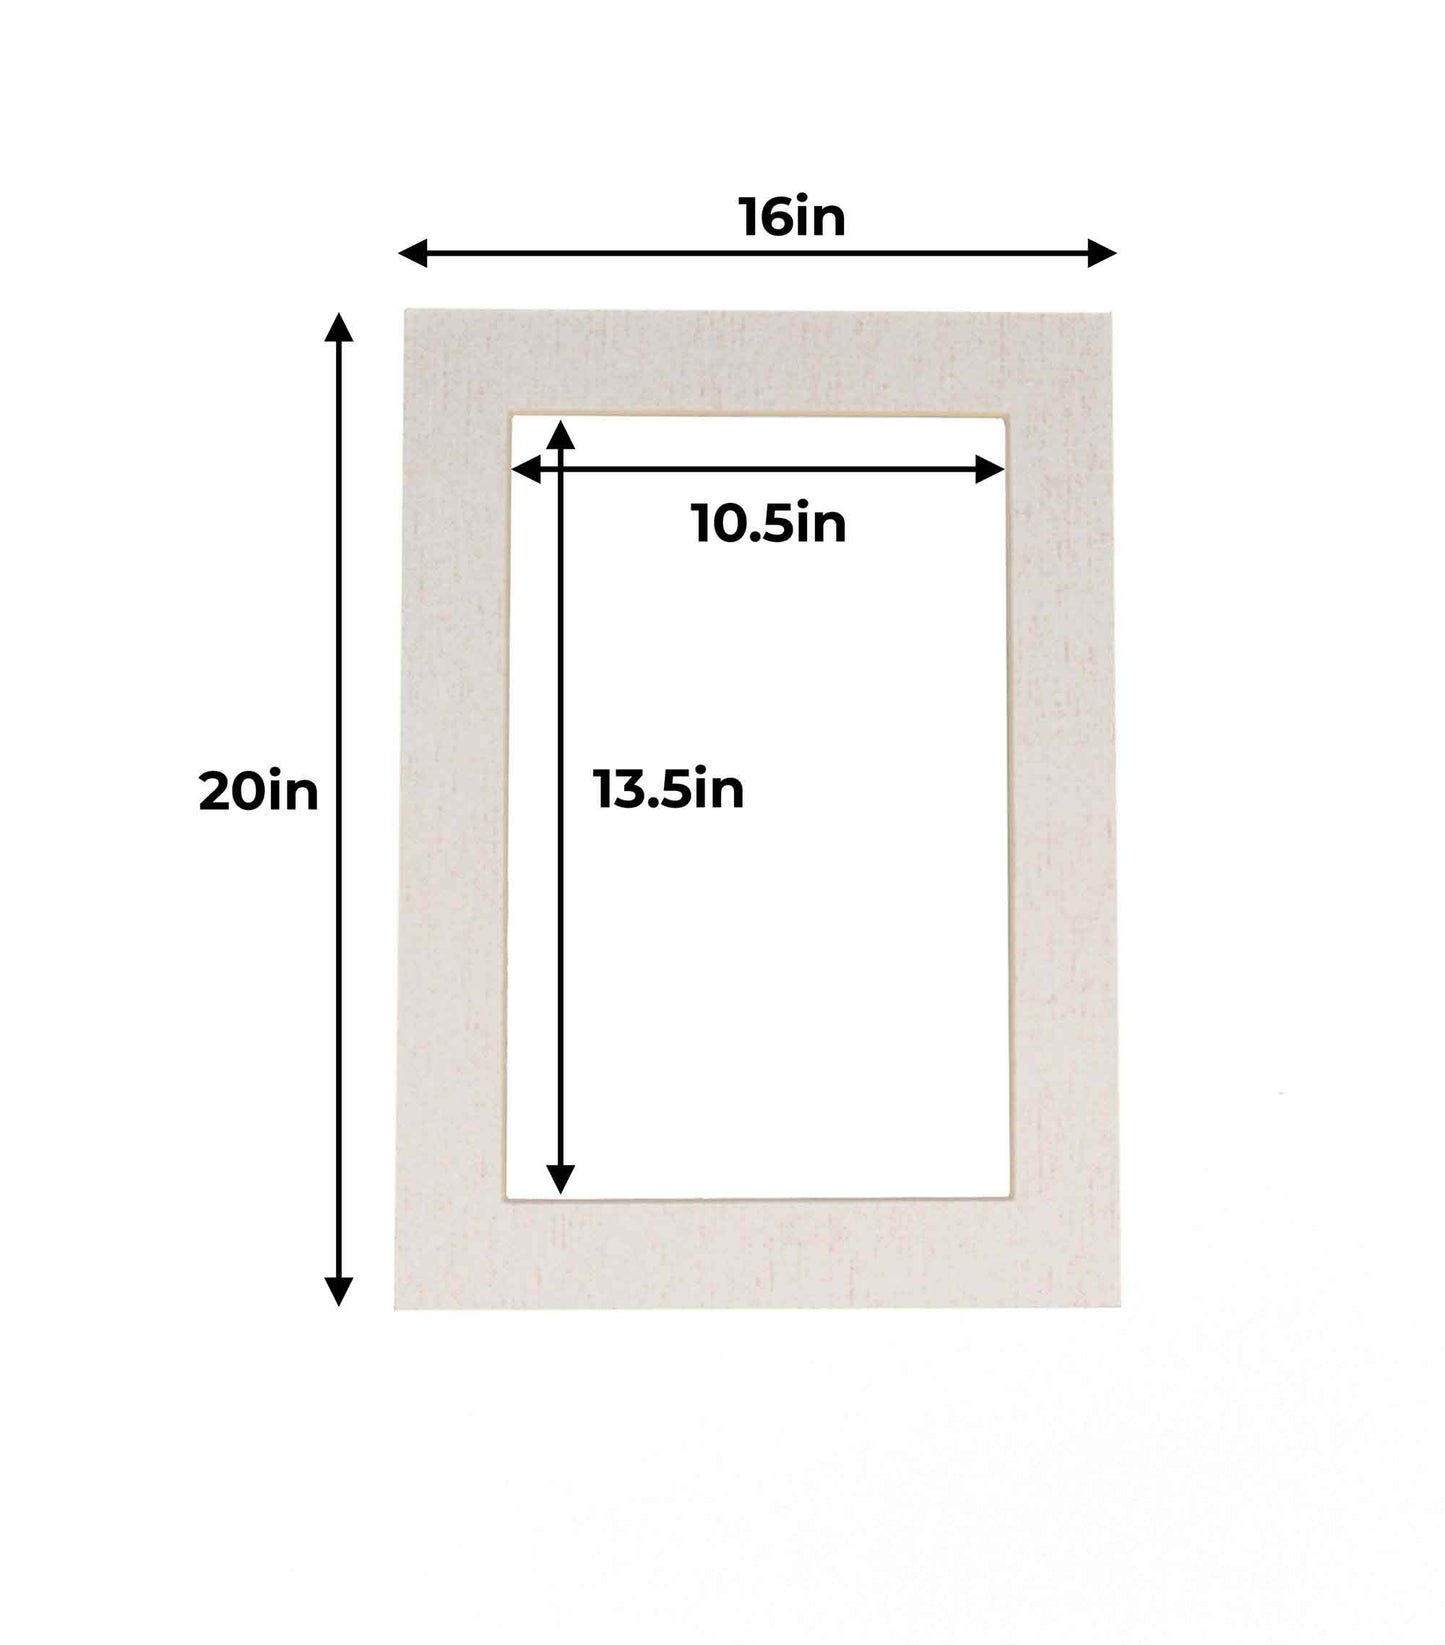 Pack of 25 White Linen Canvas Precut Acid-Free Matboards